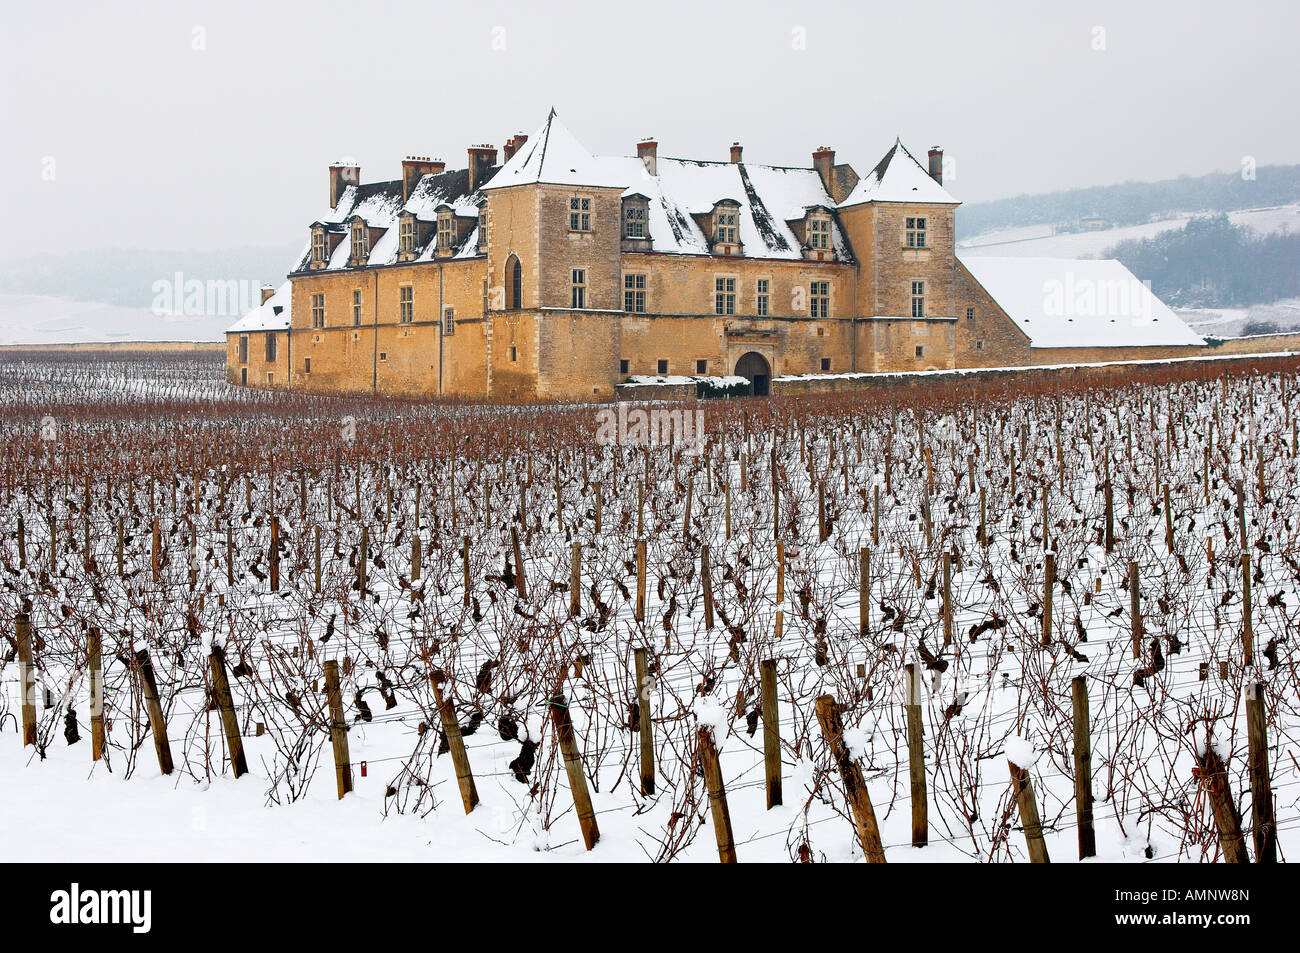 Chateau Clos de Vougeot and vineyard in the snow. Cote D'or, Burgundy, France. Stock Photo